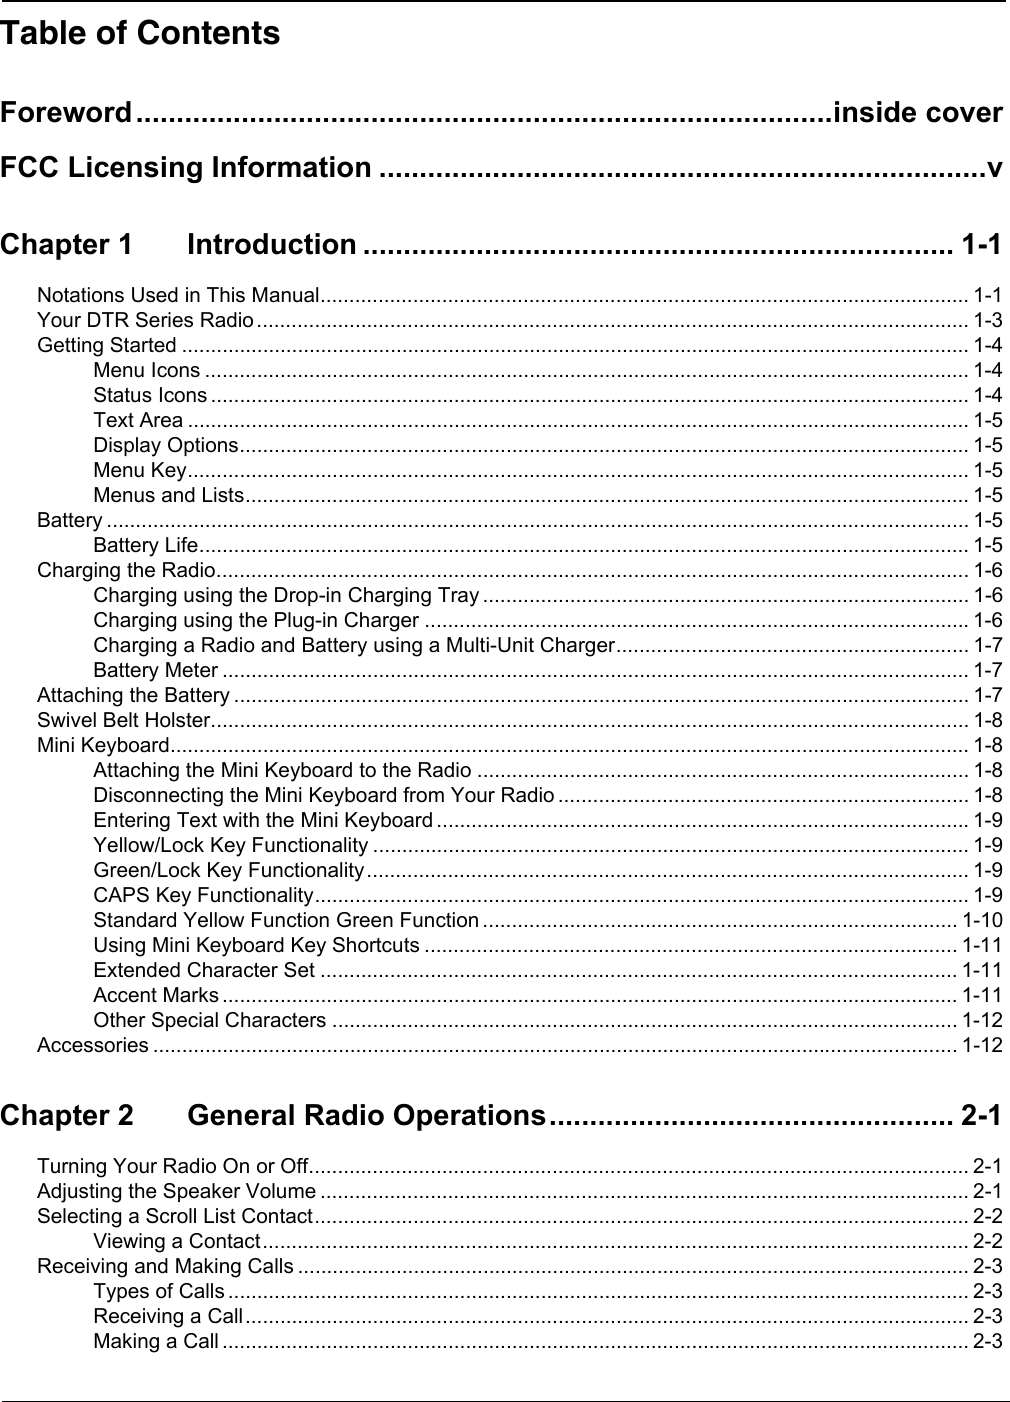 Table of ContentsForeword......................................................................................inside coverFCC Licensing Information ...........................................................................vChapter 1 Introduction ......................................................................... 1-1Notations Used in This Manual................................................................................................................ 1-1Your DTR Series Radio ........................................................................................................................... 1-3Getting Started ........................................................................................................................................ 1-4Menu Icons .................................................................................................................................... 1-4Status Icons ................................................................................................................................... 1-4Text Area ....................................................................................................................................... 1-5Display Options.............................................................................................................................. 1-5Menu Key....................................................................................................................................... 1-5Menus and Lists............................................................................................................................. 1-5Battery ..................................................................................................................................................... 1-5Battery Life..................................................................................................................................... 1-5Charging the Radio.................................................................................................................................. 1-6Charging using the Drop-in Charging Tray .................................................................................... 1-6Charging using the Plug-in Charger ..............................................................................................1-6Charging a Radio and Battery using a Multi-Unit Charger............................................................. 1-7Battery Meter ................................................................................................................................. 1-7Attaching the Battery ............................................................................................................................... 1-7Swivel Belt Holster................................................................................................................................... 1-8Mini Keyboard.......................................................................................................................................... 1-8Attaching the Mini Keyboard to the Radio ..................................................................................... 1-8Disconnecting the Mini Keyboard from Your Radio ....................................................................... 1-8Entering Text with the Mini Keyboard ............................................................................................1-9Yellow/Lock Key Functionality ....................................................................................................... 1-9Green/Lock Key Functionality........................................................................................................ 1-9CAPS Key Functionality................................................................................................................. 1-9Standard Yellow Function Green Function .................................................................................. 1-10Using Mini Keyboard Key Shortcuts ............................................................................................ 1-11Extended Character Set .............................................................................................................. 1-11Accent Marks ............................................................................................................................... 1-11Other Special Characters ............................................................................................................ 1-12Accessories ........................................................................................................................................... 1-12Chapter 2 General Radio Operations.................................................. 2-1Turning Your Radio On or Off.................................................................................................................. 2-1Adjusting the Speaker Volume ................................................................................................................ 2-1Selecting a Scroll List Contact................................................................................................................. 2-2Viewing a Contact.......................................................................................................................... 2-2Receiving and Making Calls .................................................................................................................... 2-3Types of Calls ................................................................................................................................ 2-3Receiving a Call............................................................................................................................. 2-3Making a Call ................................................................................................................................. 2-3